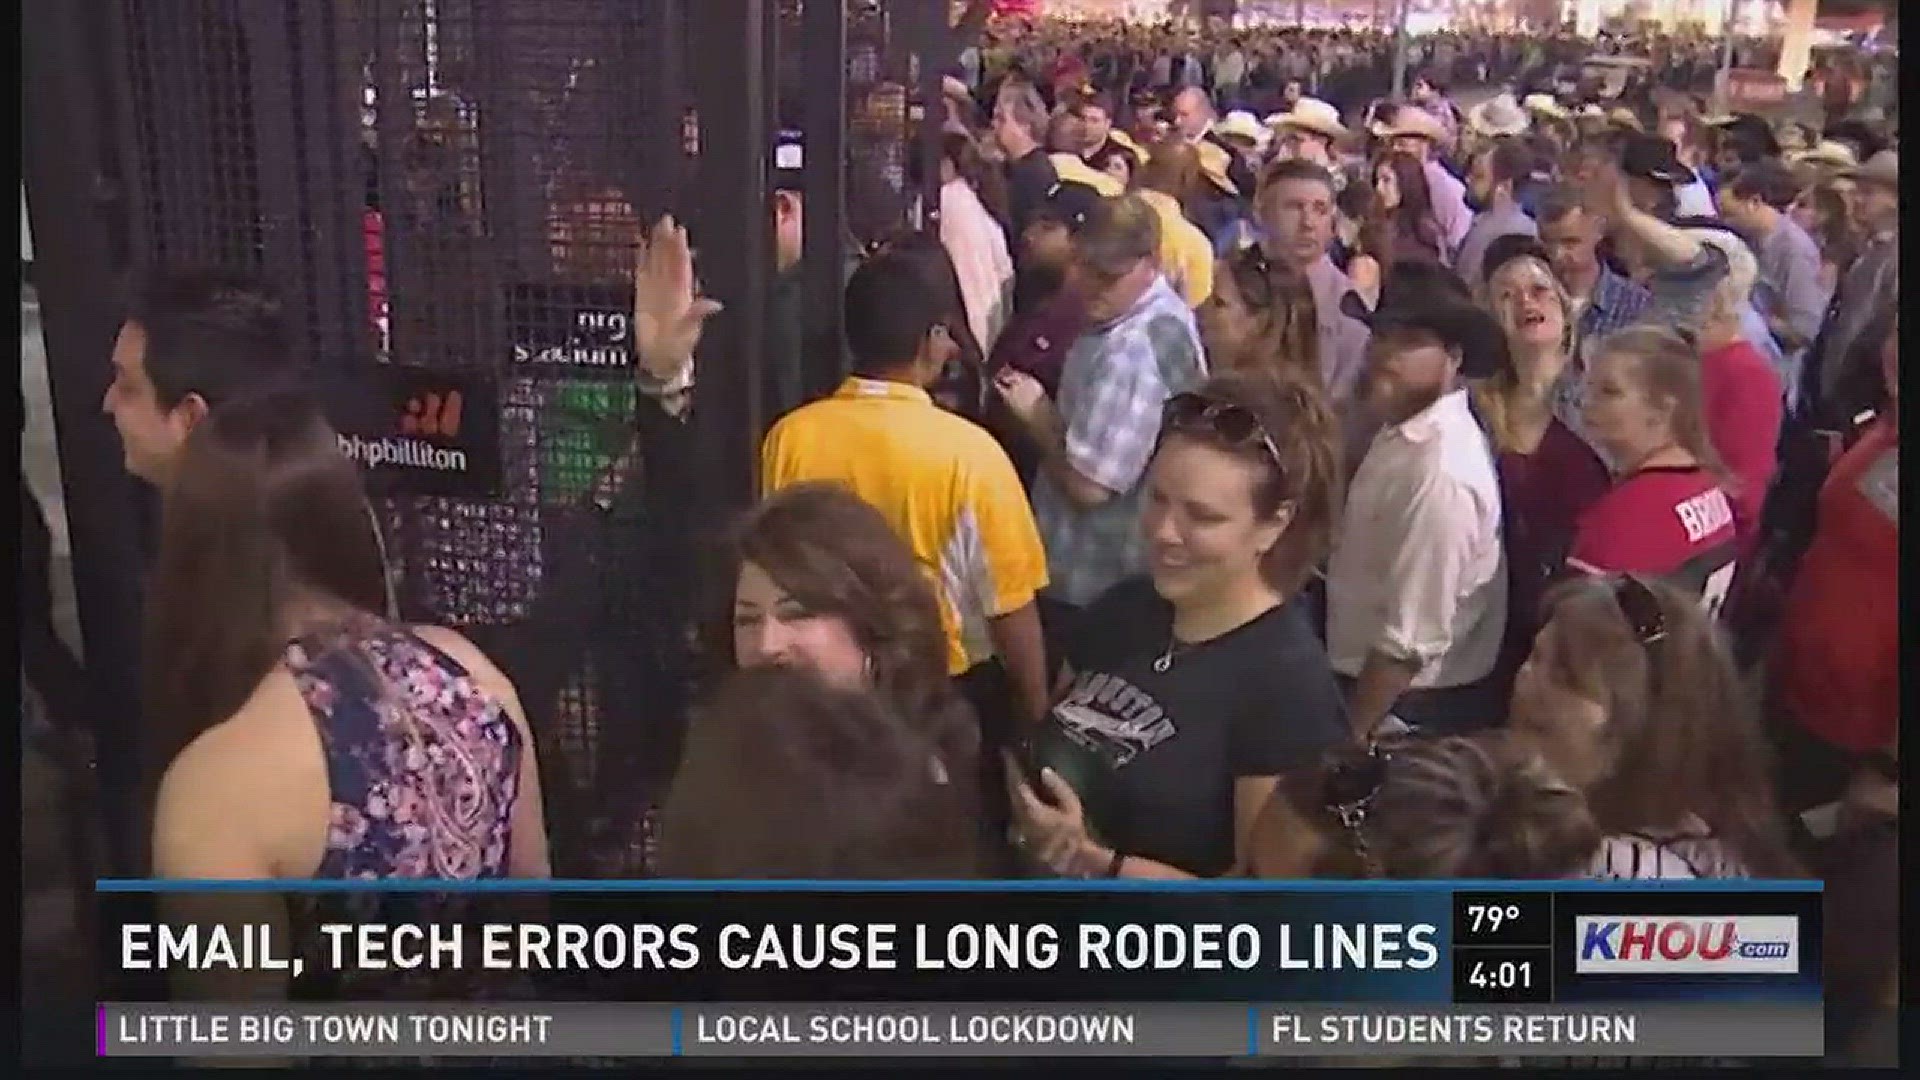 Rodeo officials say they have corrected the errors that led to long lines on opening night.